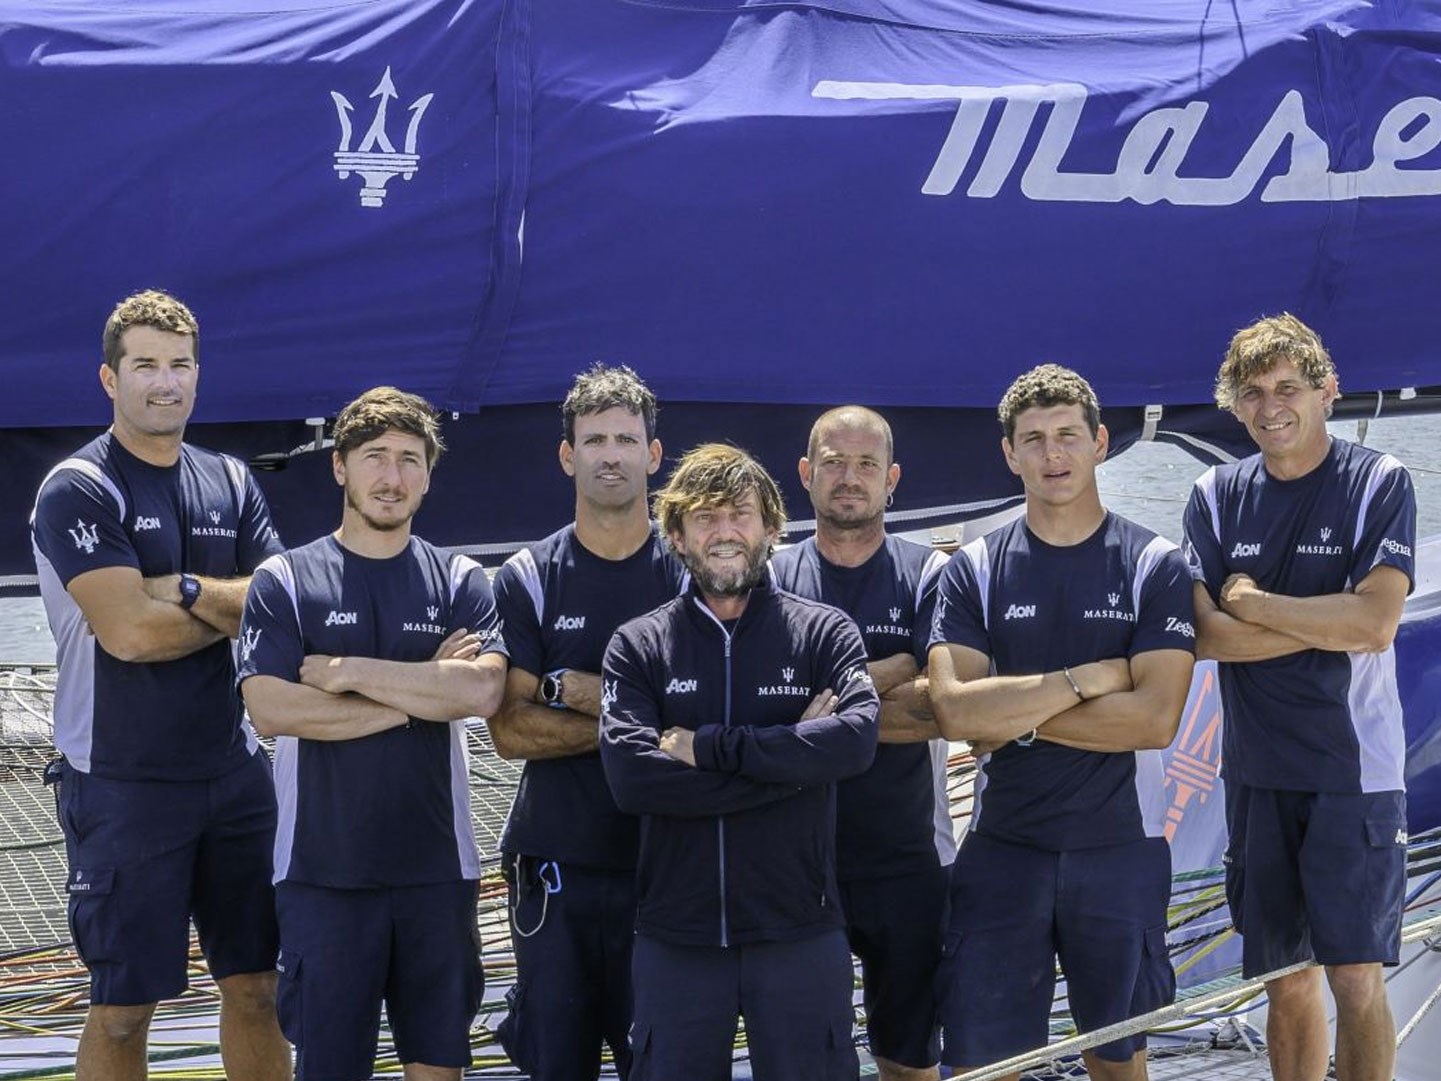 Maserati Multi 70 and Giovanni Soldini are ready for the start of the 50th edition of the Transpacific Yacht Race